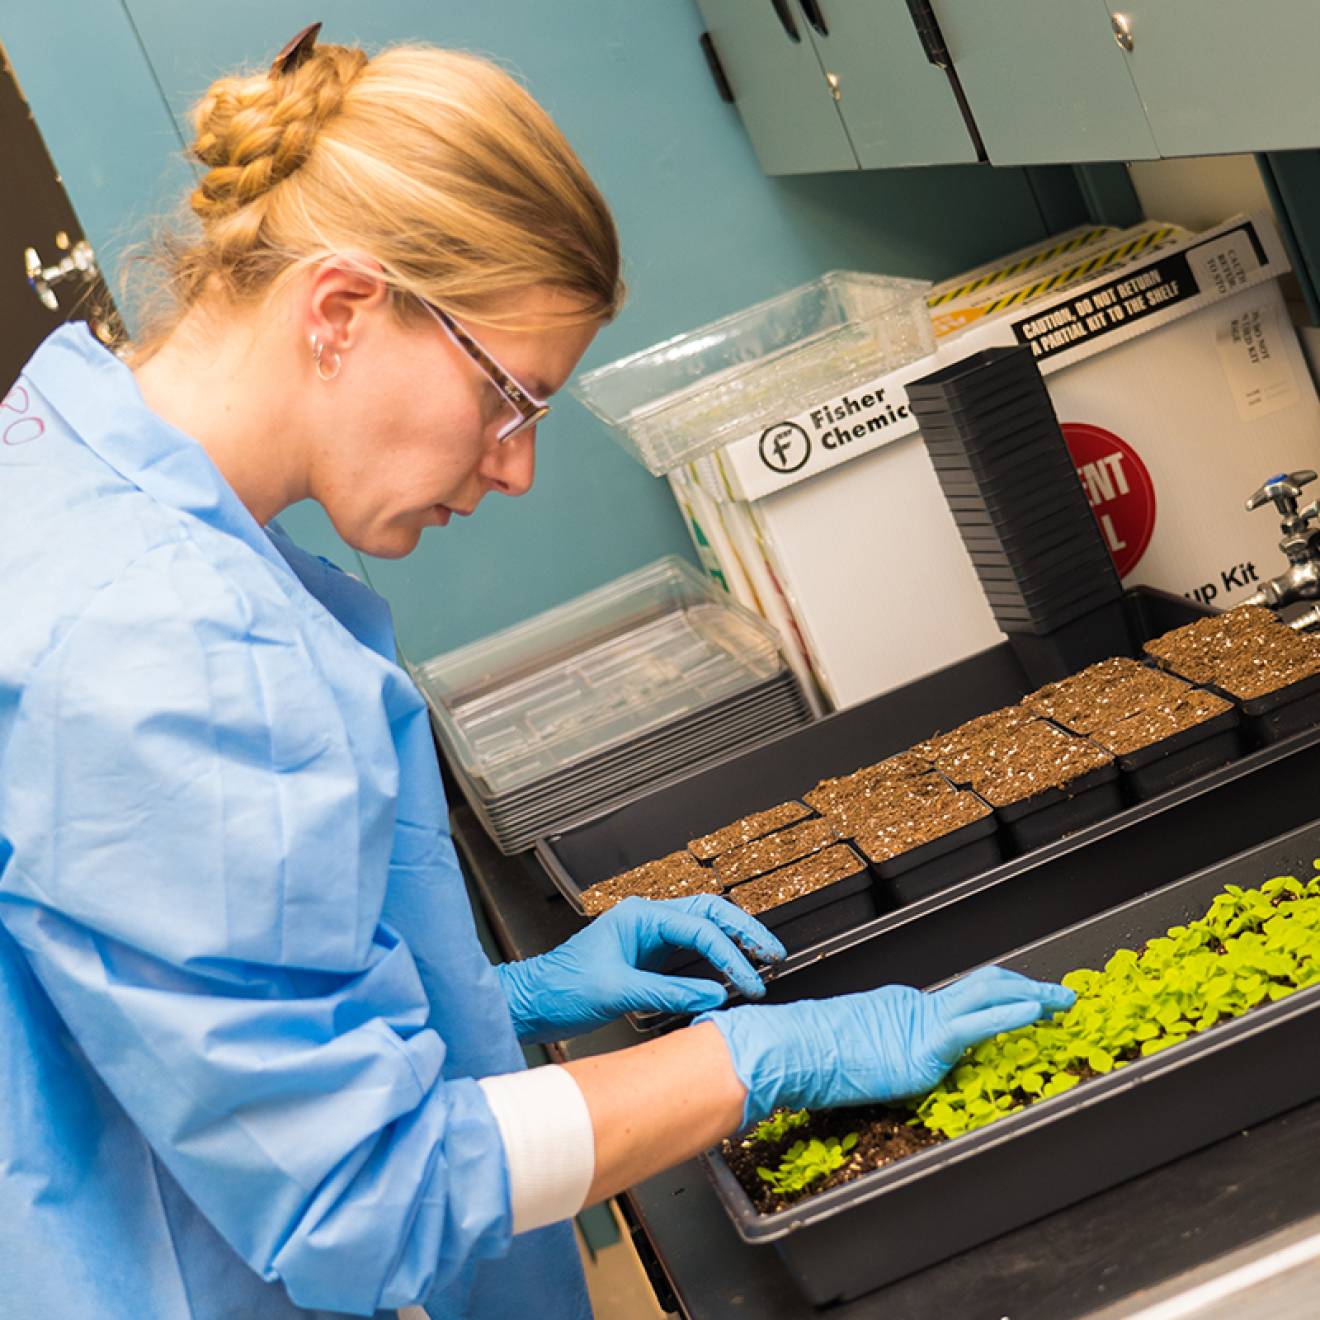 Veronique Beiss prepares a tray of plants to produce cowpea mosaic virus nanoparticles. 